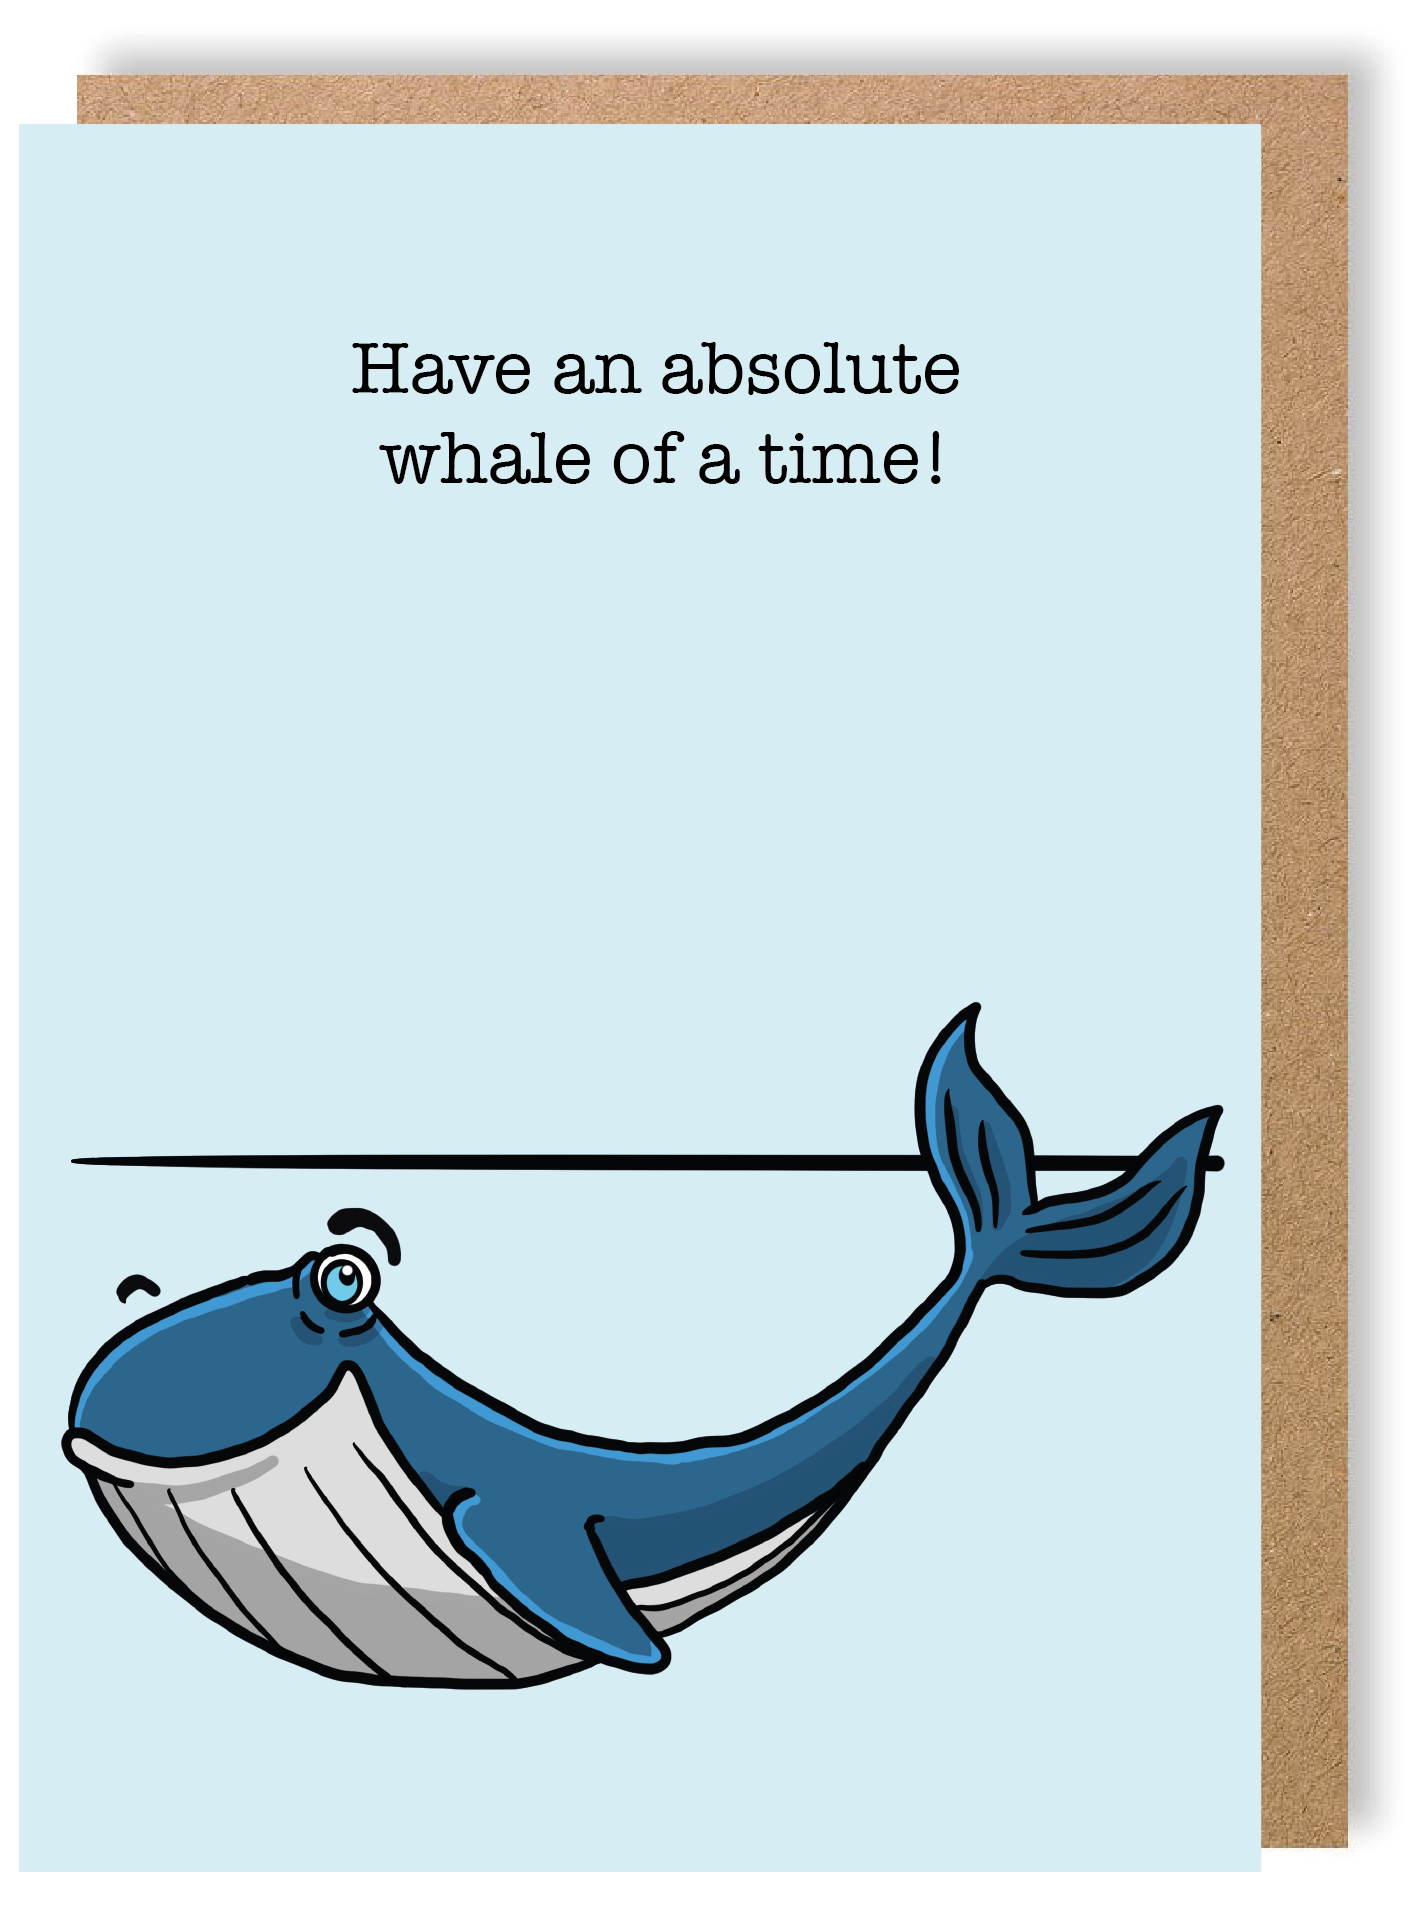 Have a whale of a time - Whale - Greetings Card - LukeHorton Art